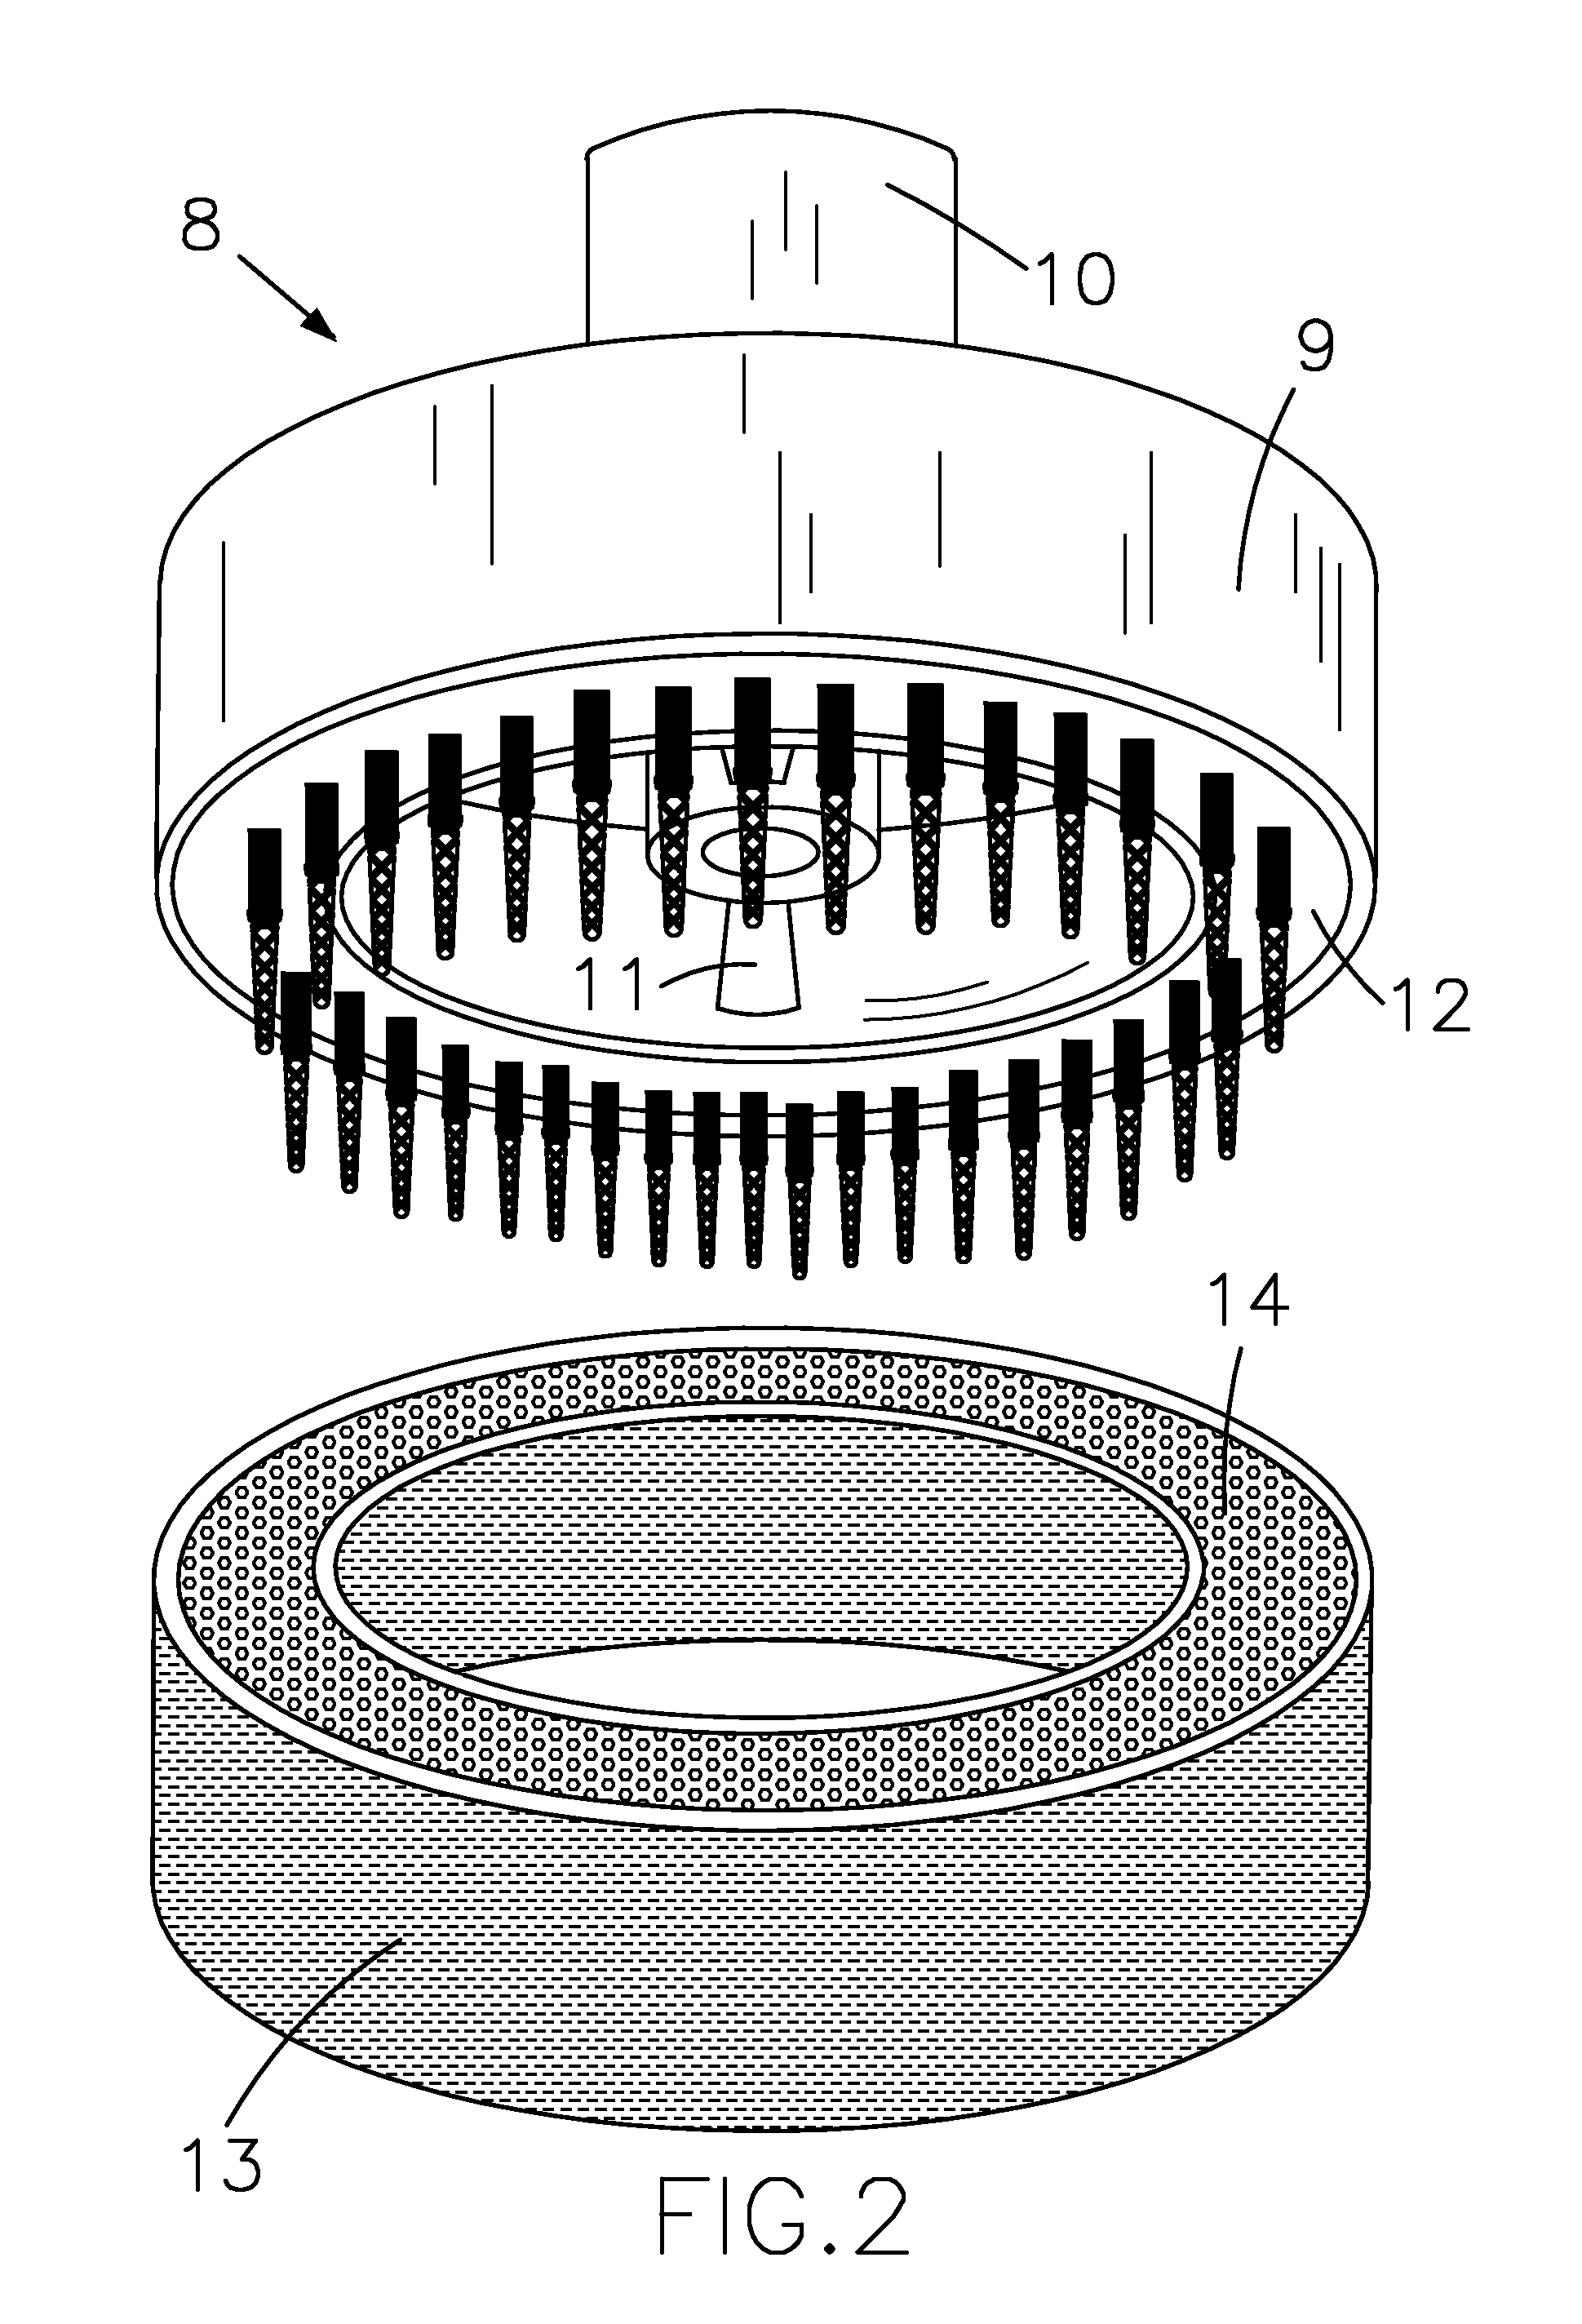 Method for applying a powdered-diamond coating to the surface of cutters for dentistry excluding slot surfaces